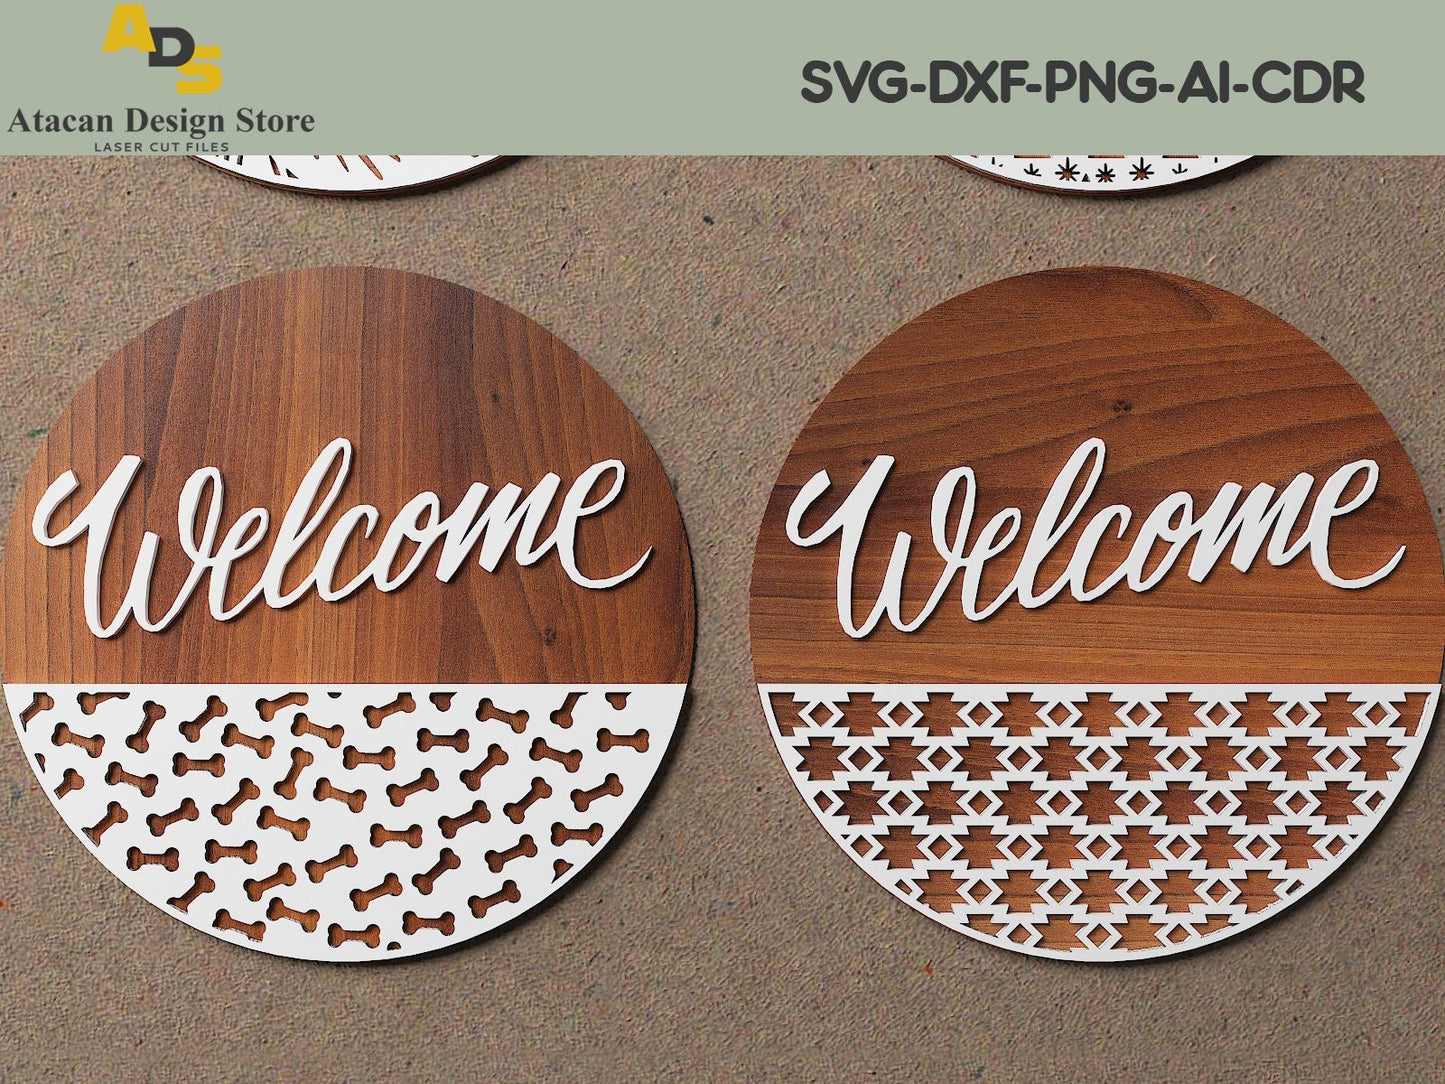 Door hanging signs / Welcome svg sign / Wood Cutting files / Round hangers / instant download ADS117